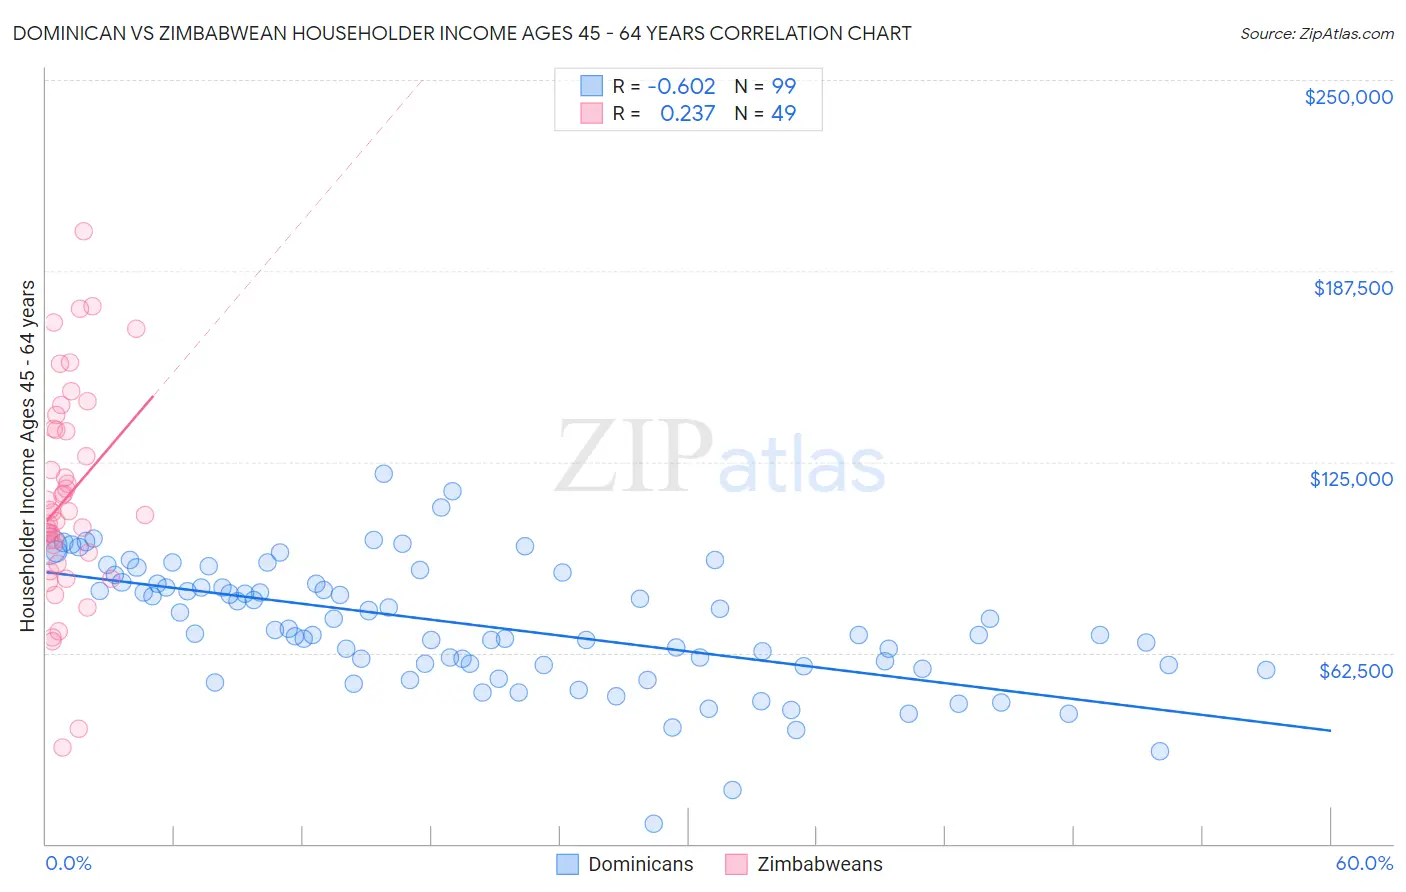 Dominican vs Zimbabwean Householder Income Ages 45 - 64 years